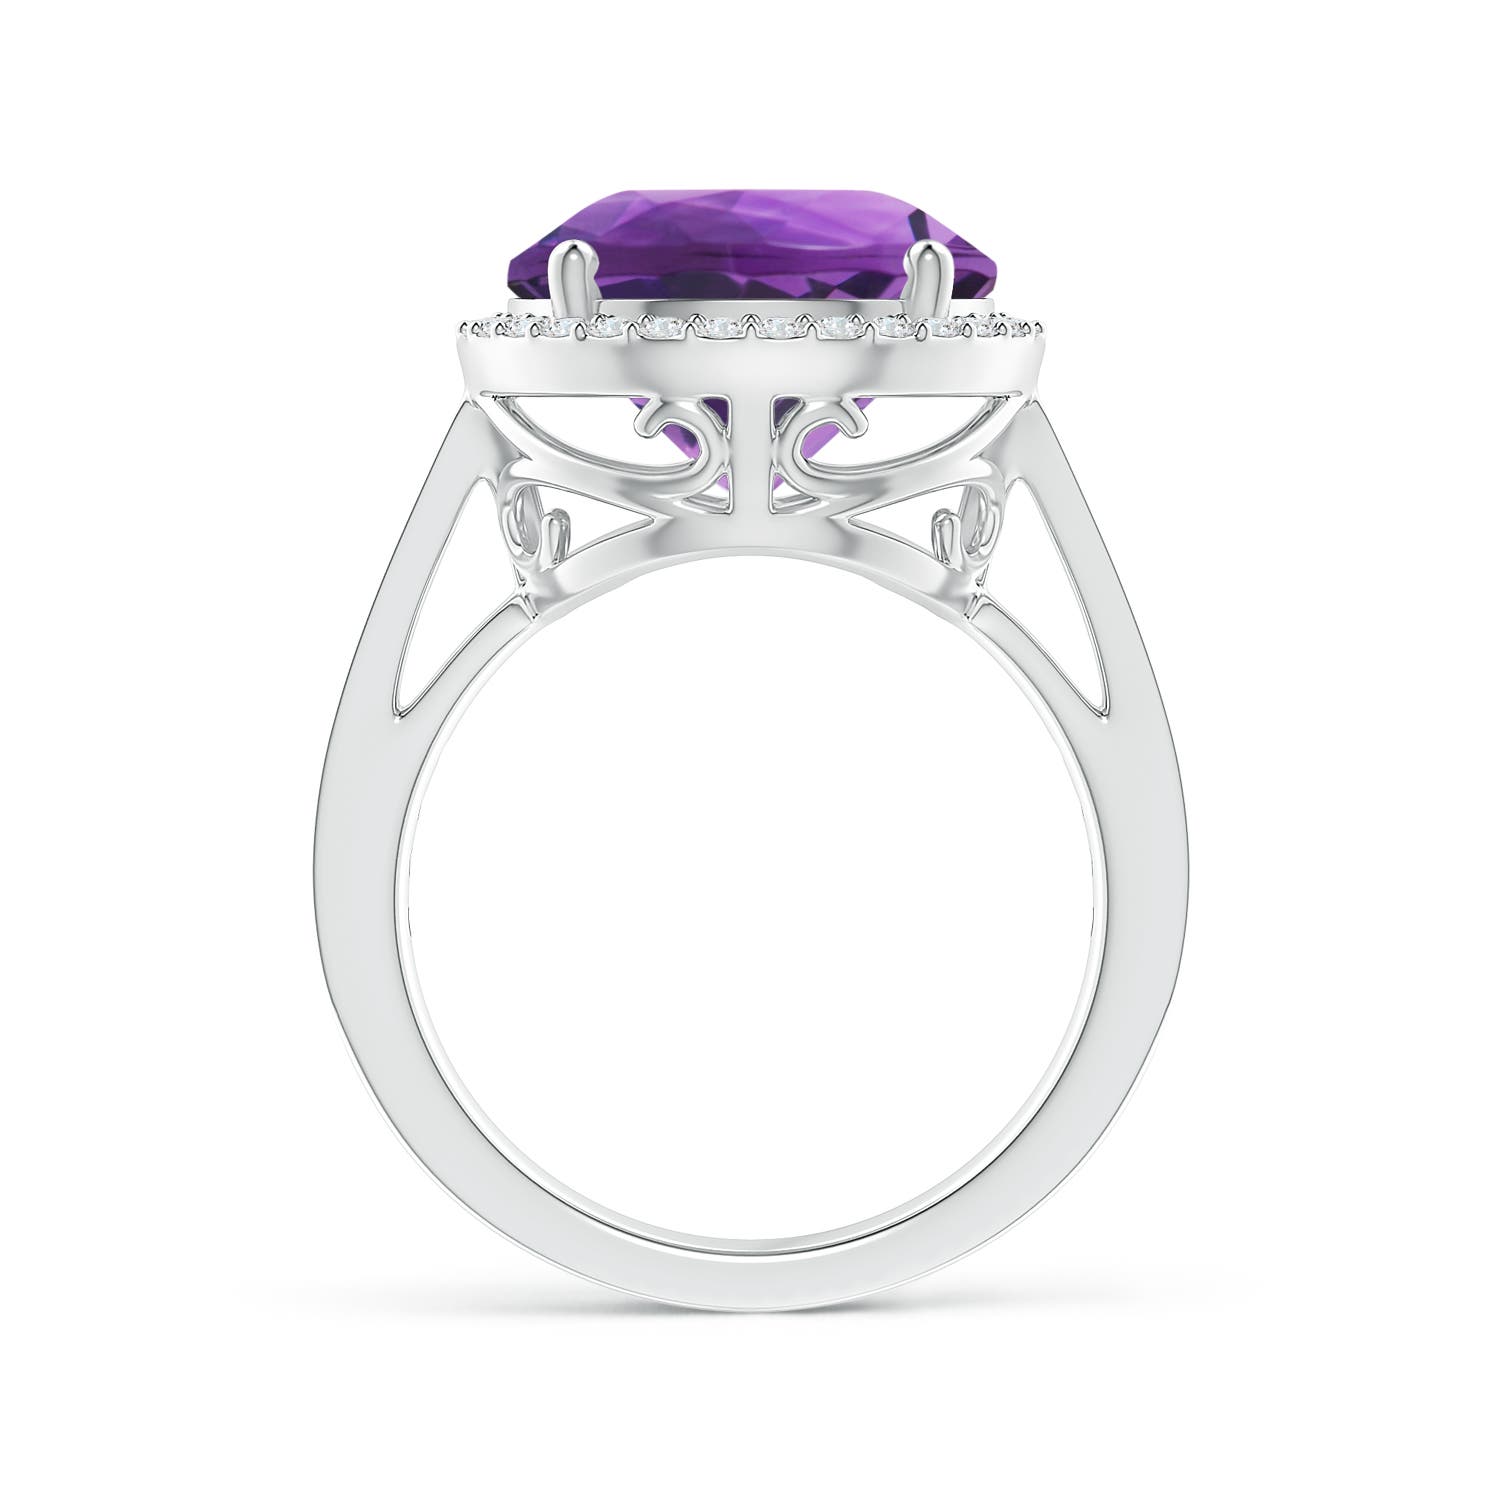 AAA - Amethyst / 5.94 CT / 14 KT White Gold